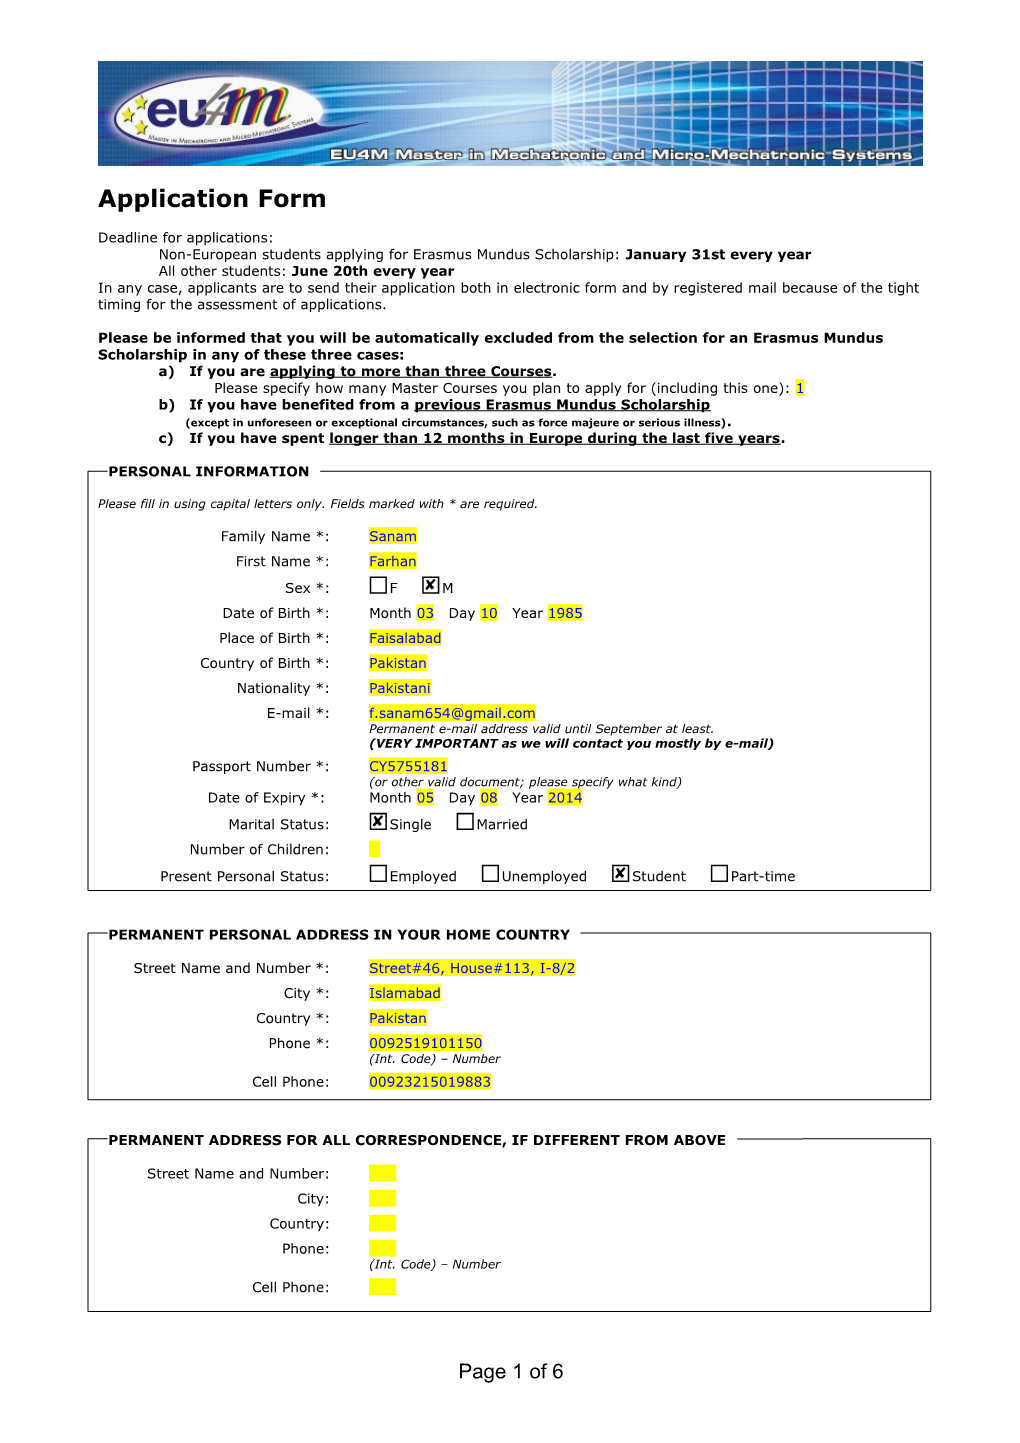 Application Form s31